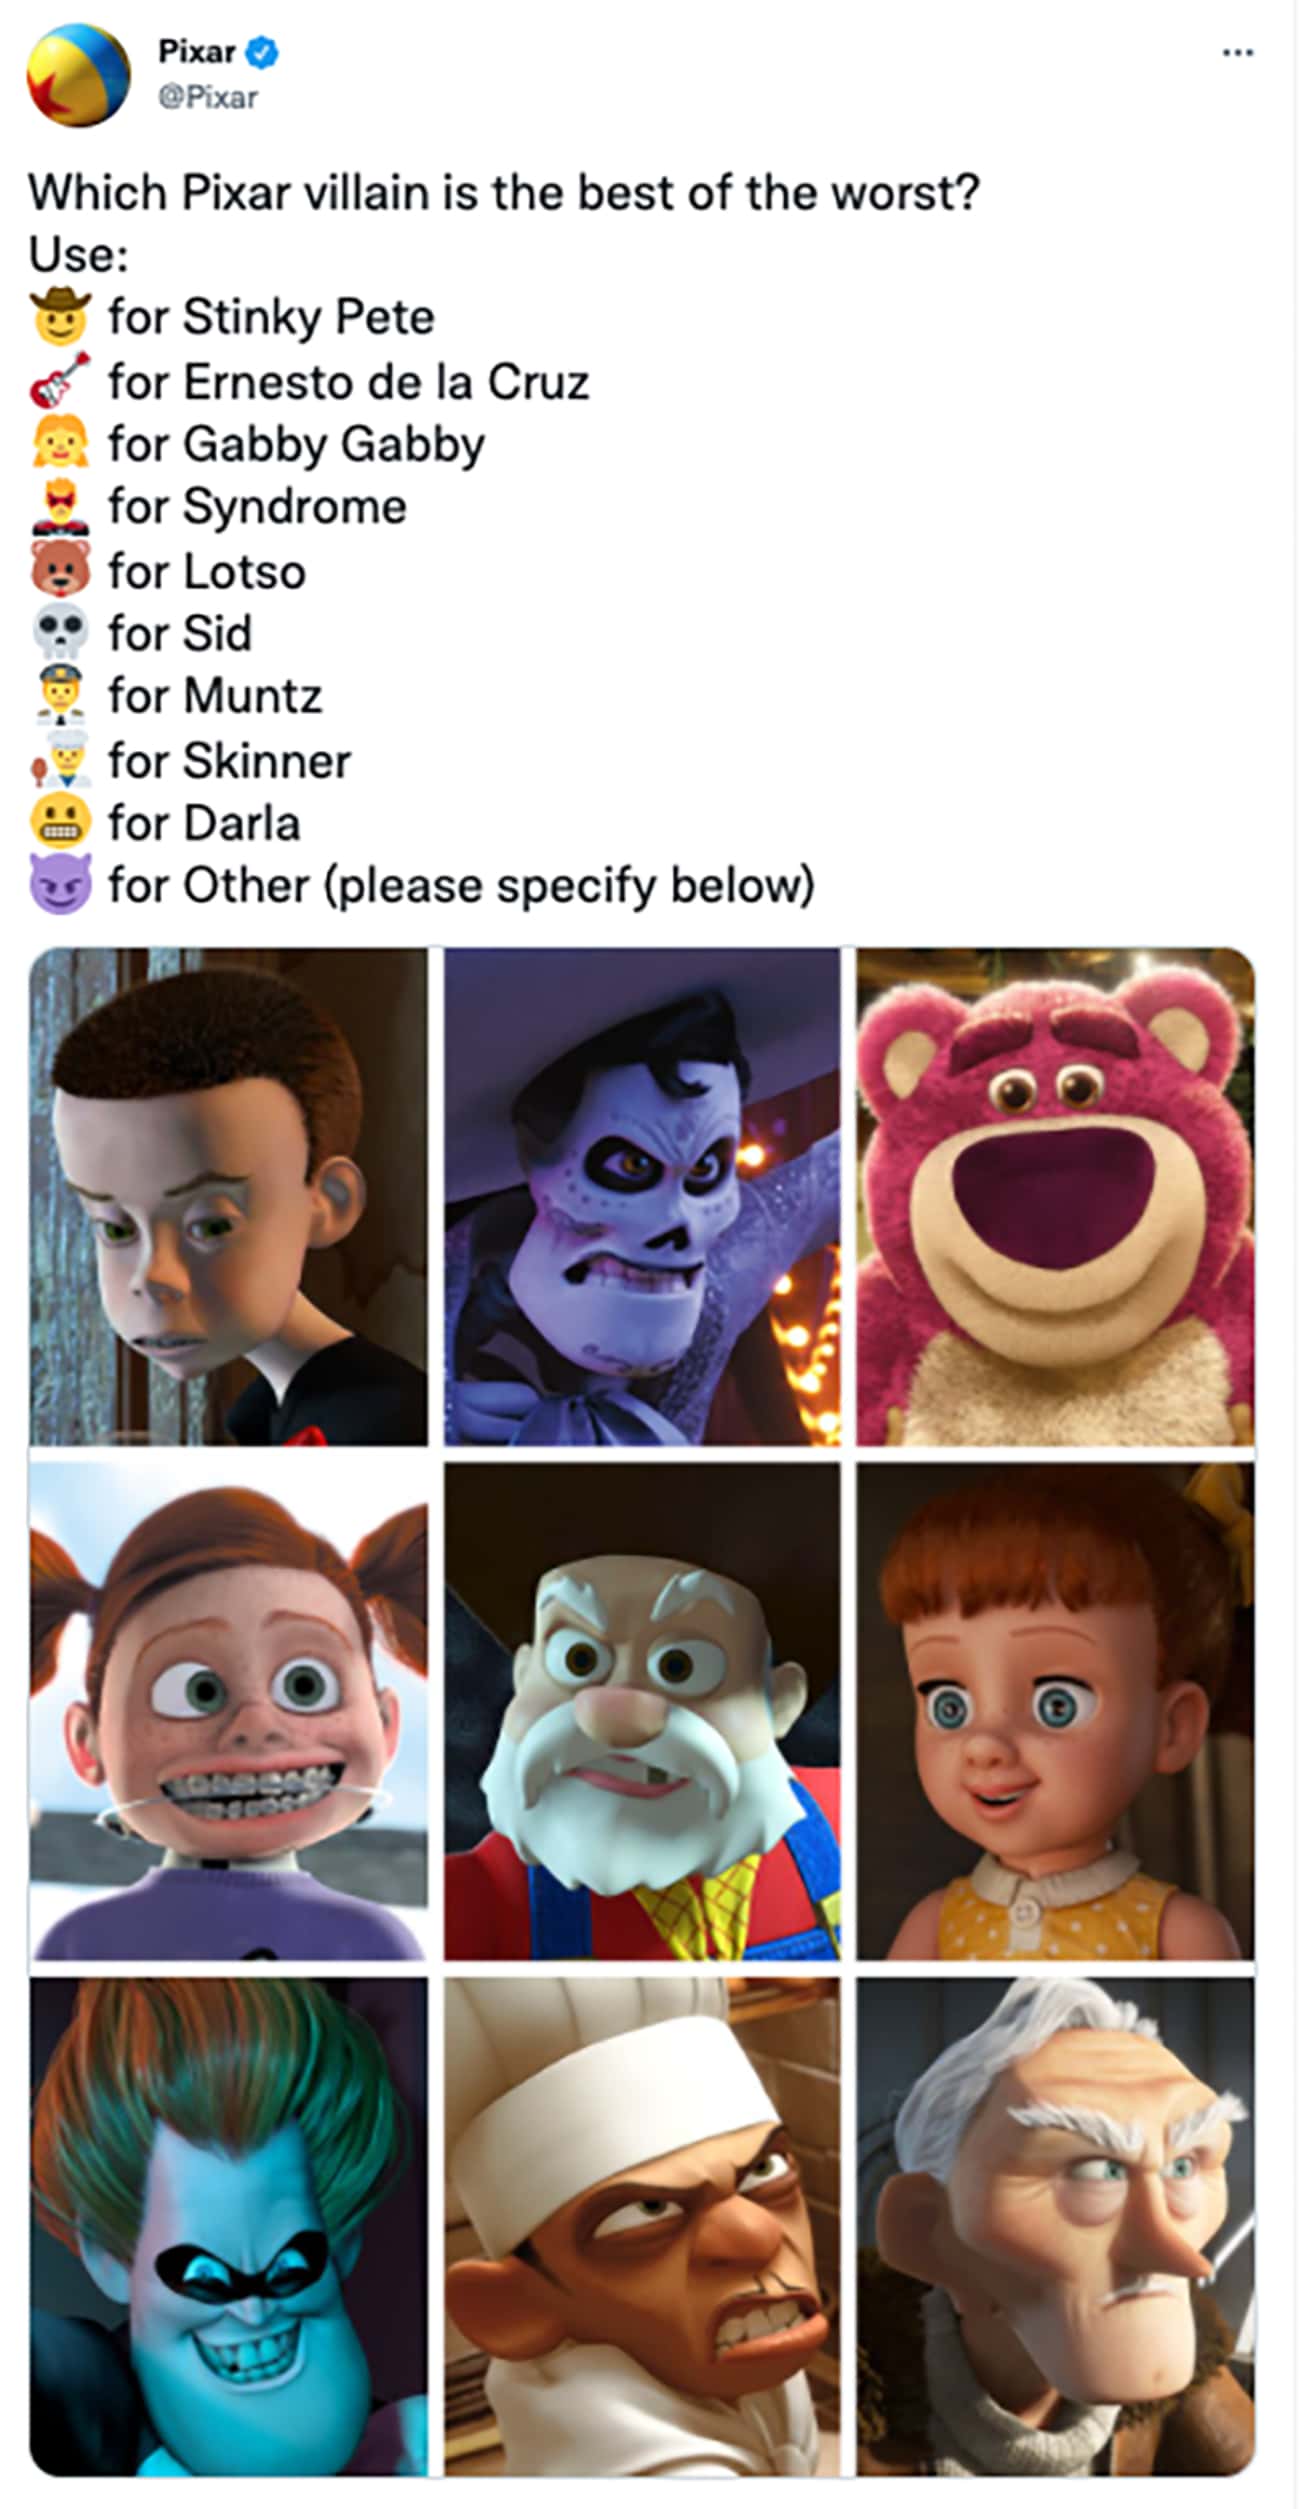 It Started With A Tweet From Pixar, Asking Fans To Rate Their Favorite Villains